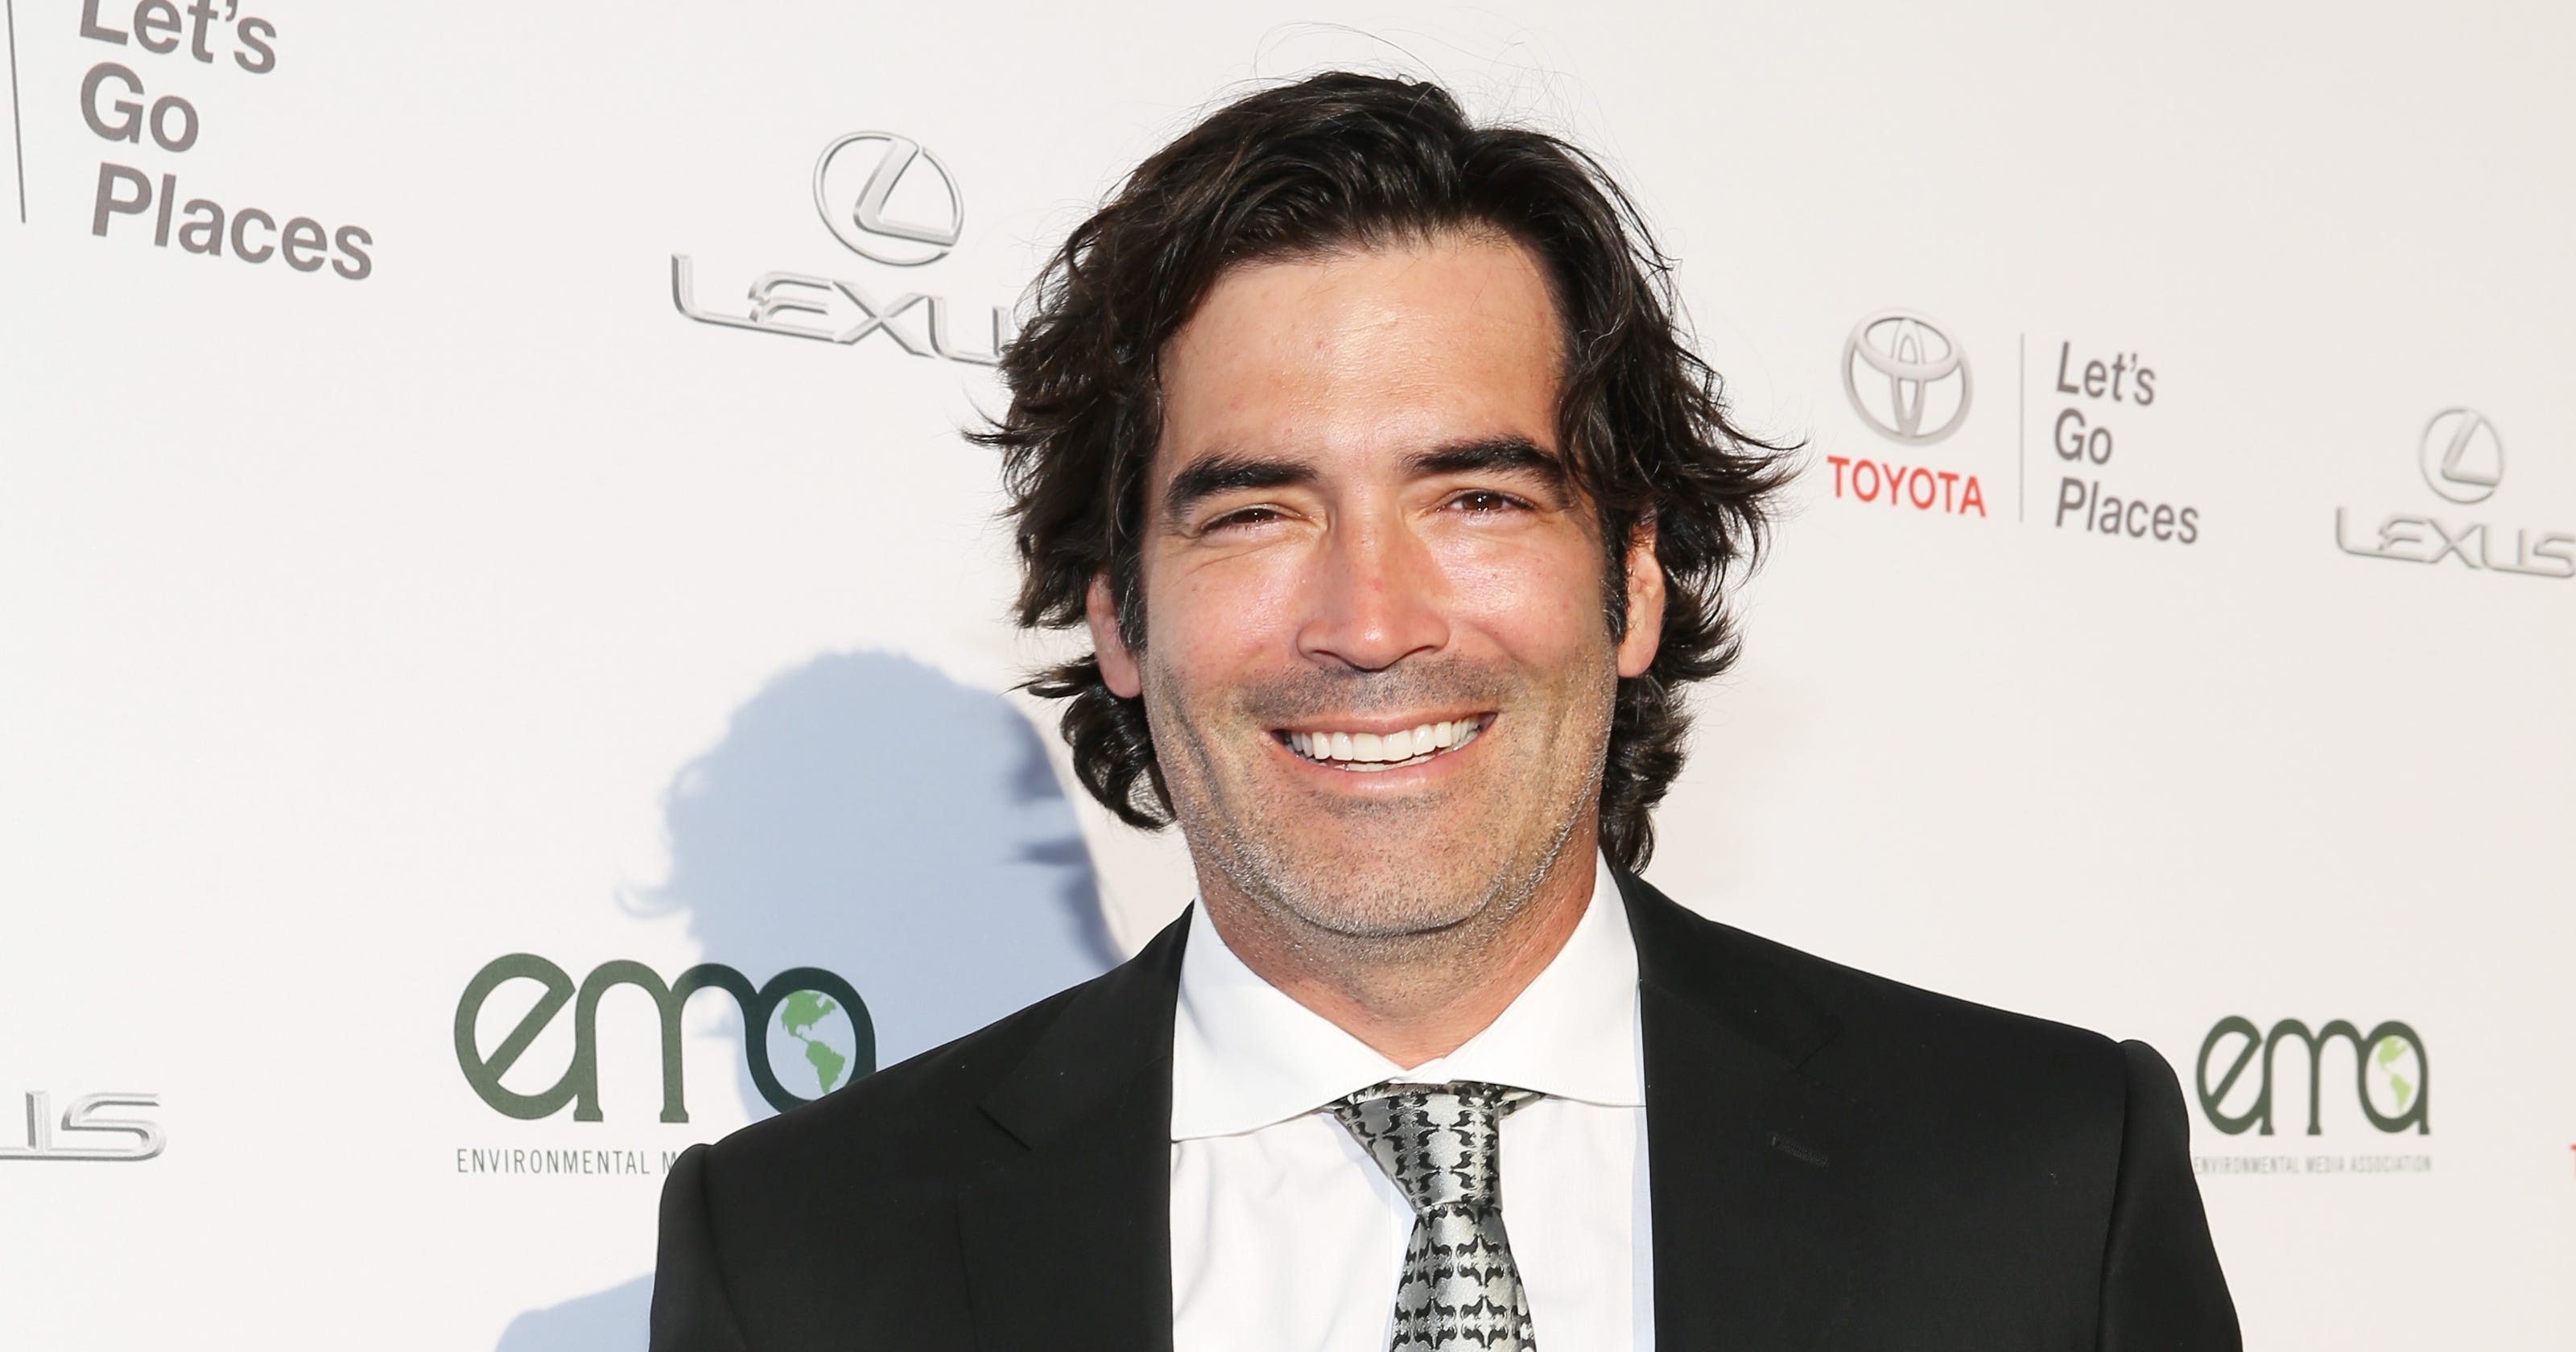 Hgtv Host Carter Oosterhouse Accused Of Sexual Misconduct